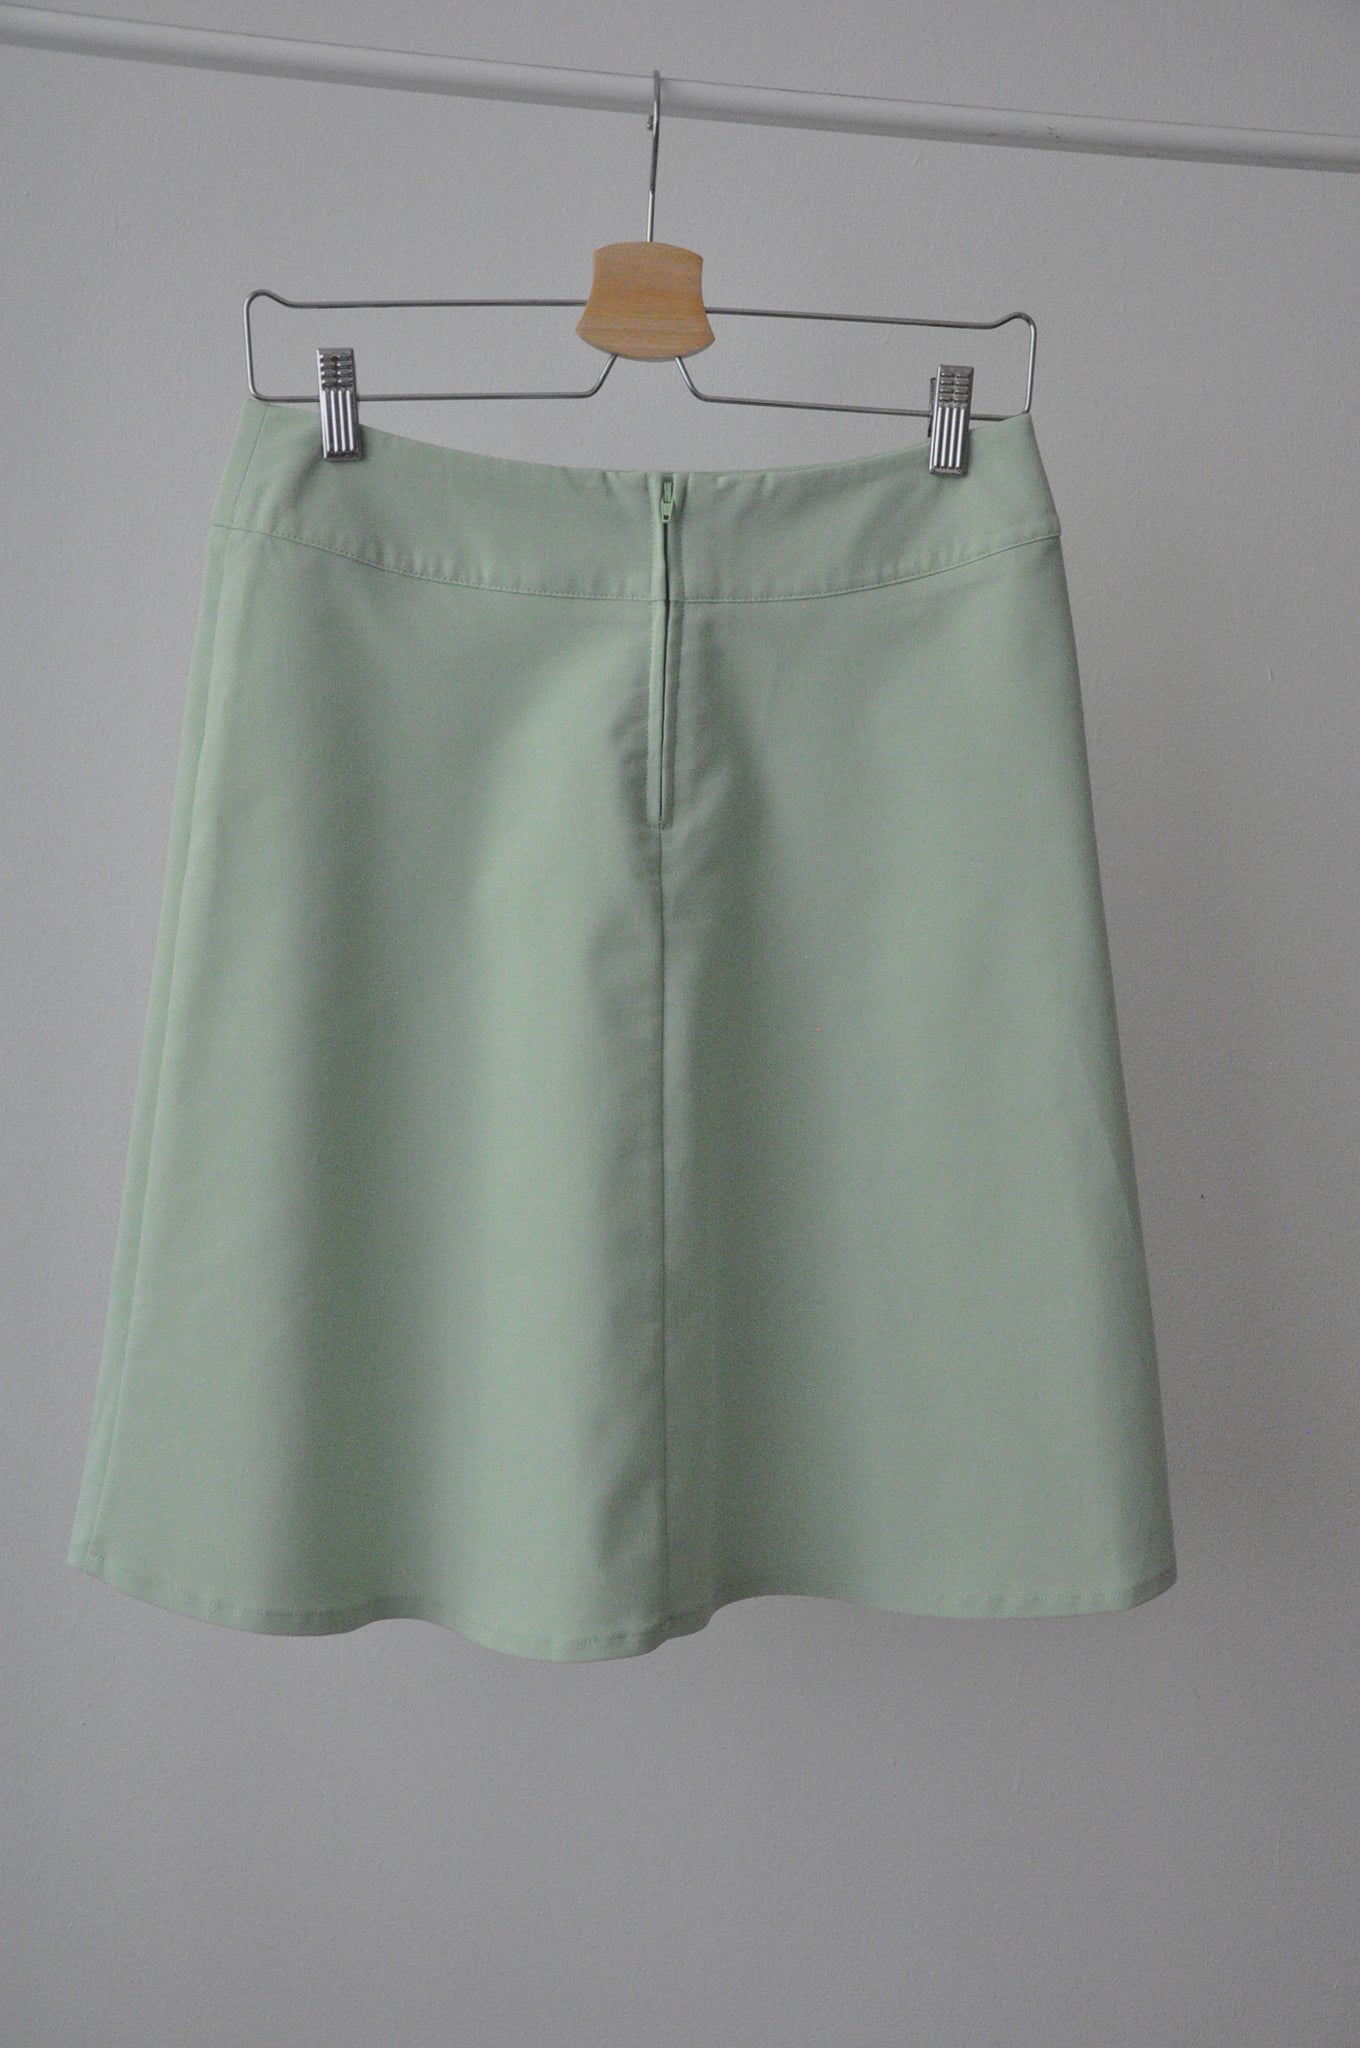 A-line skirt in mint / M-L